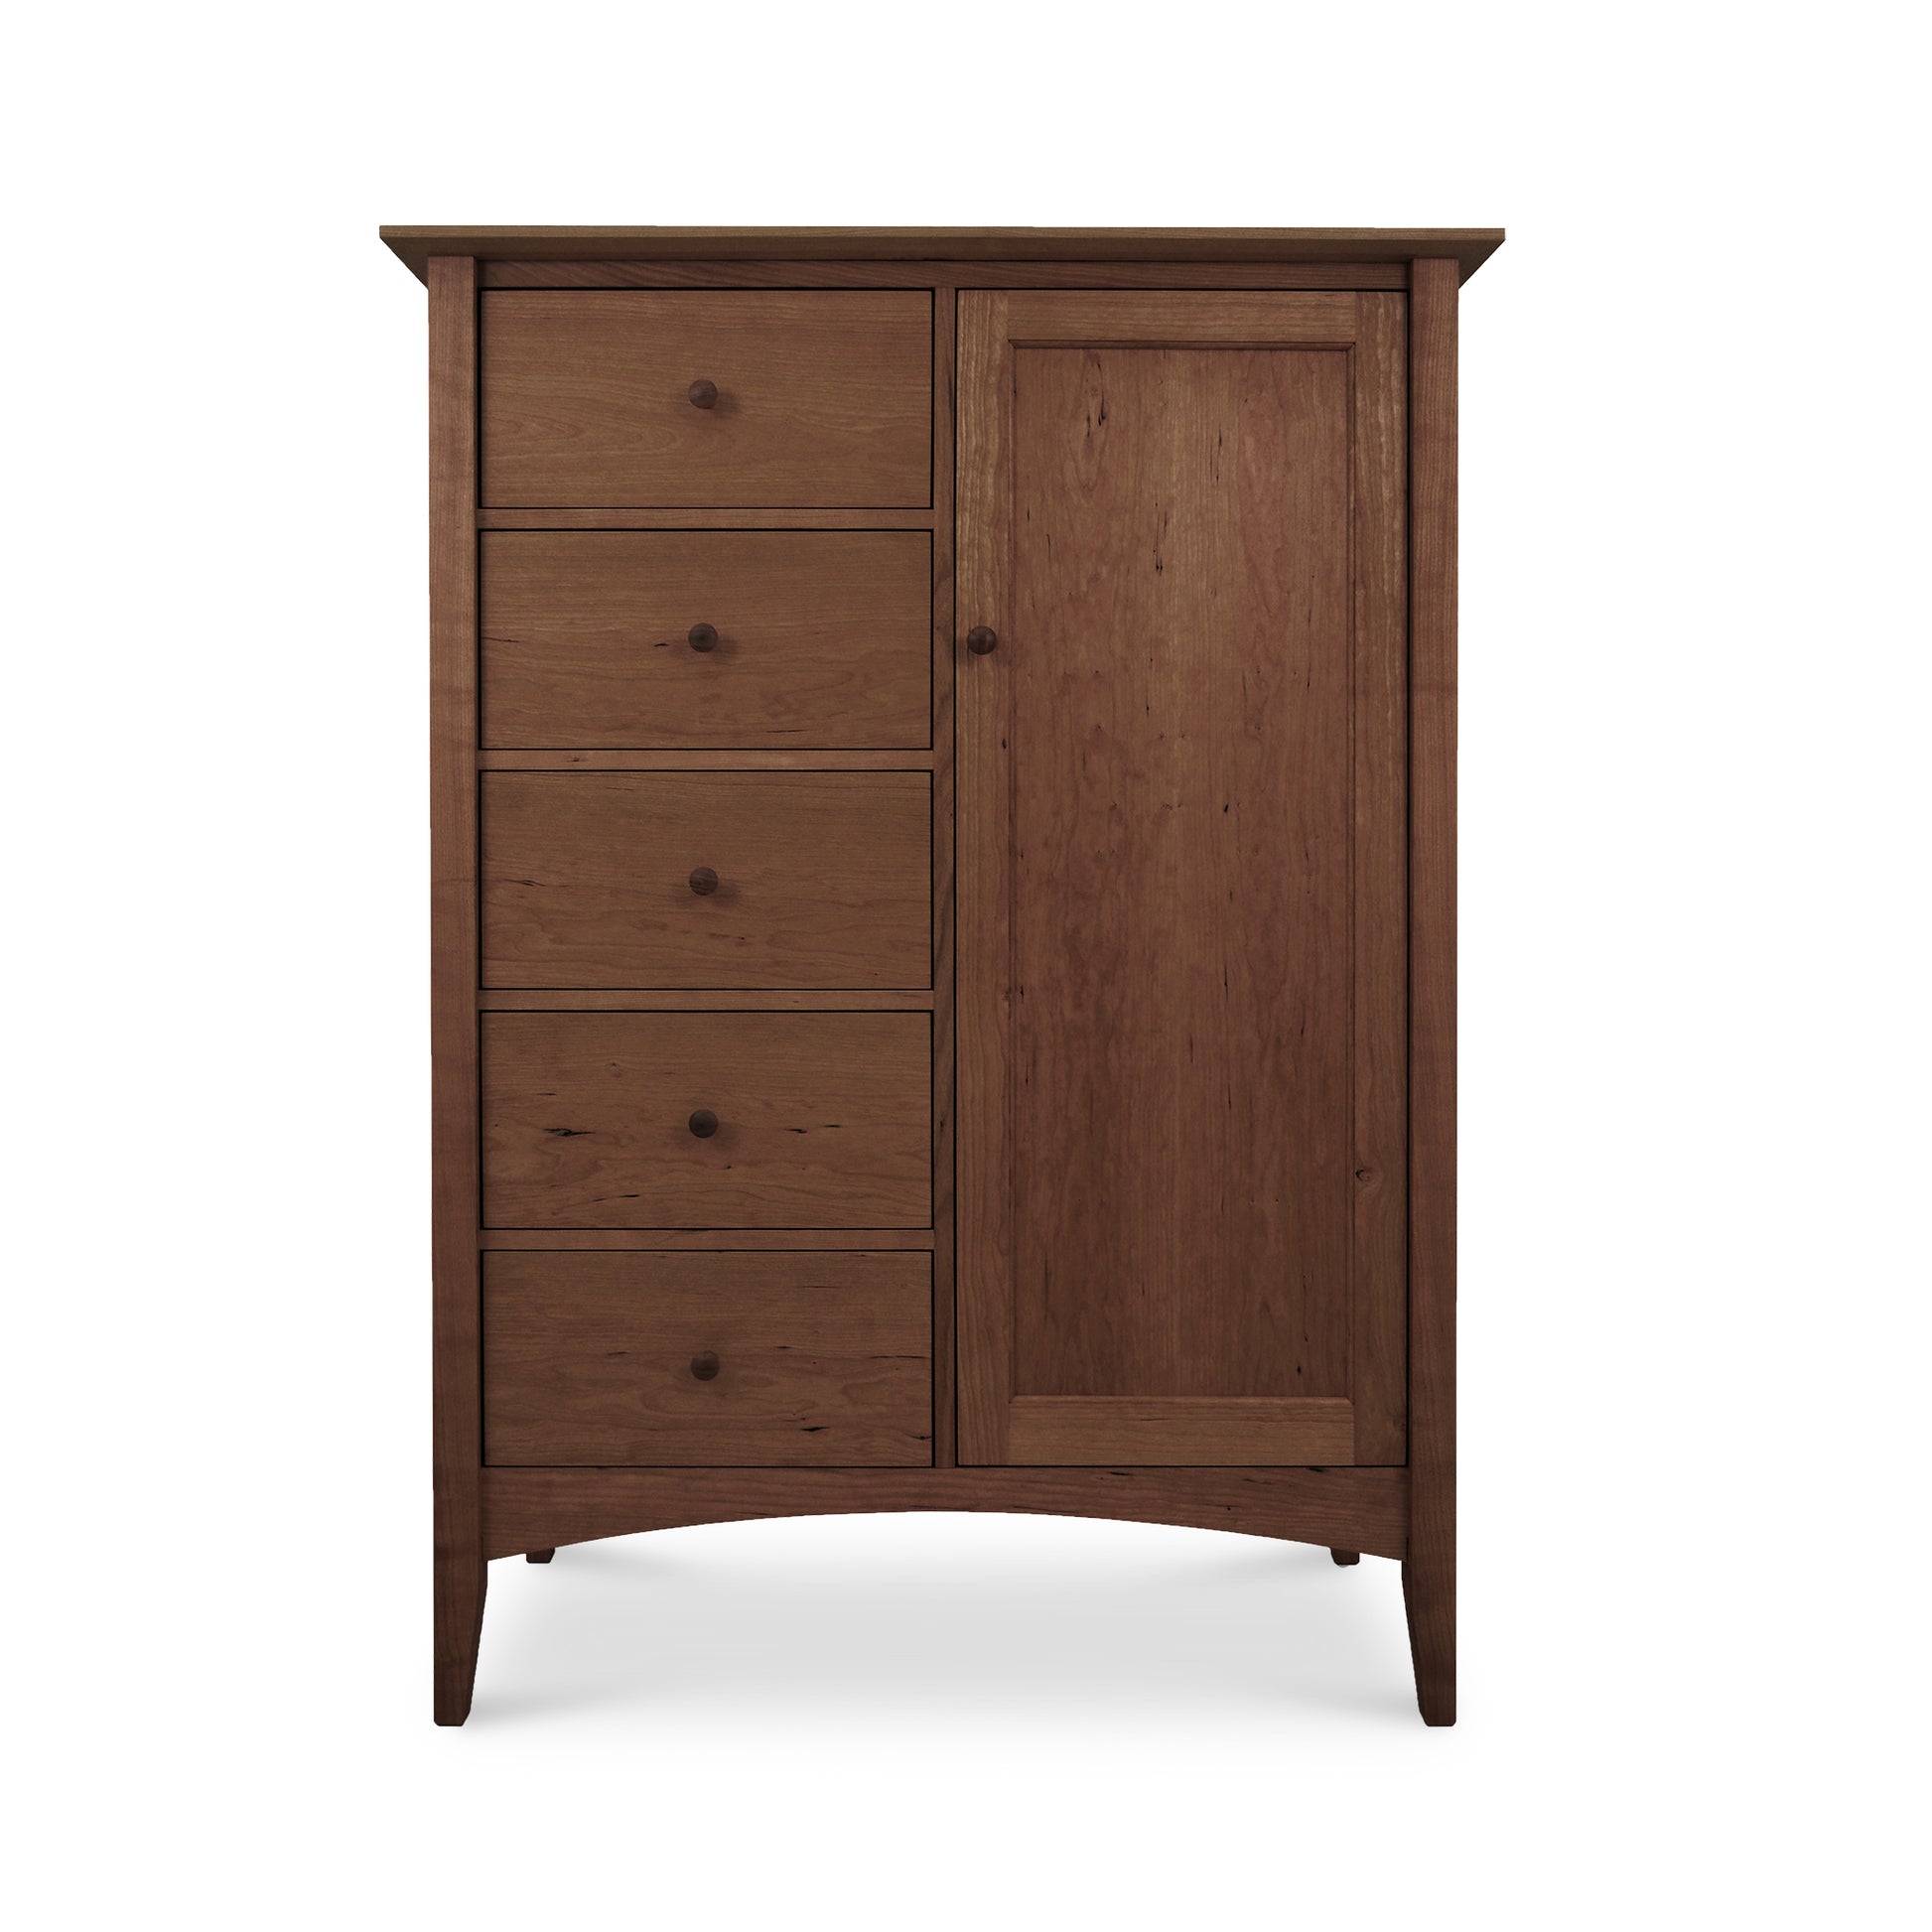 A Maple Corner Woodworks American Shaker Sweater Chest featuring solid hardwood construction, with a combination of drawers on the left and a closed door on the right, set against a white background.